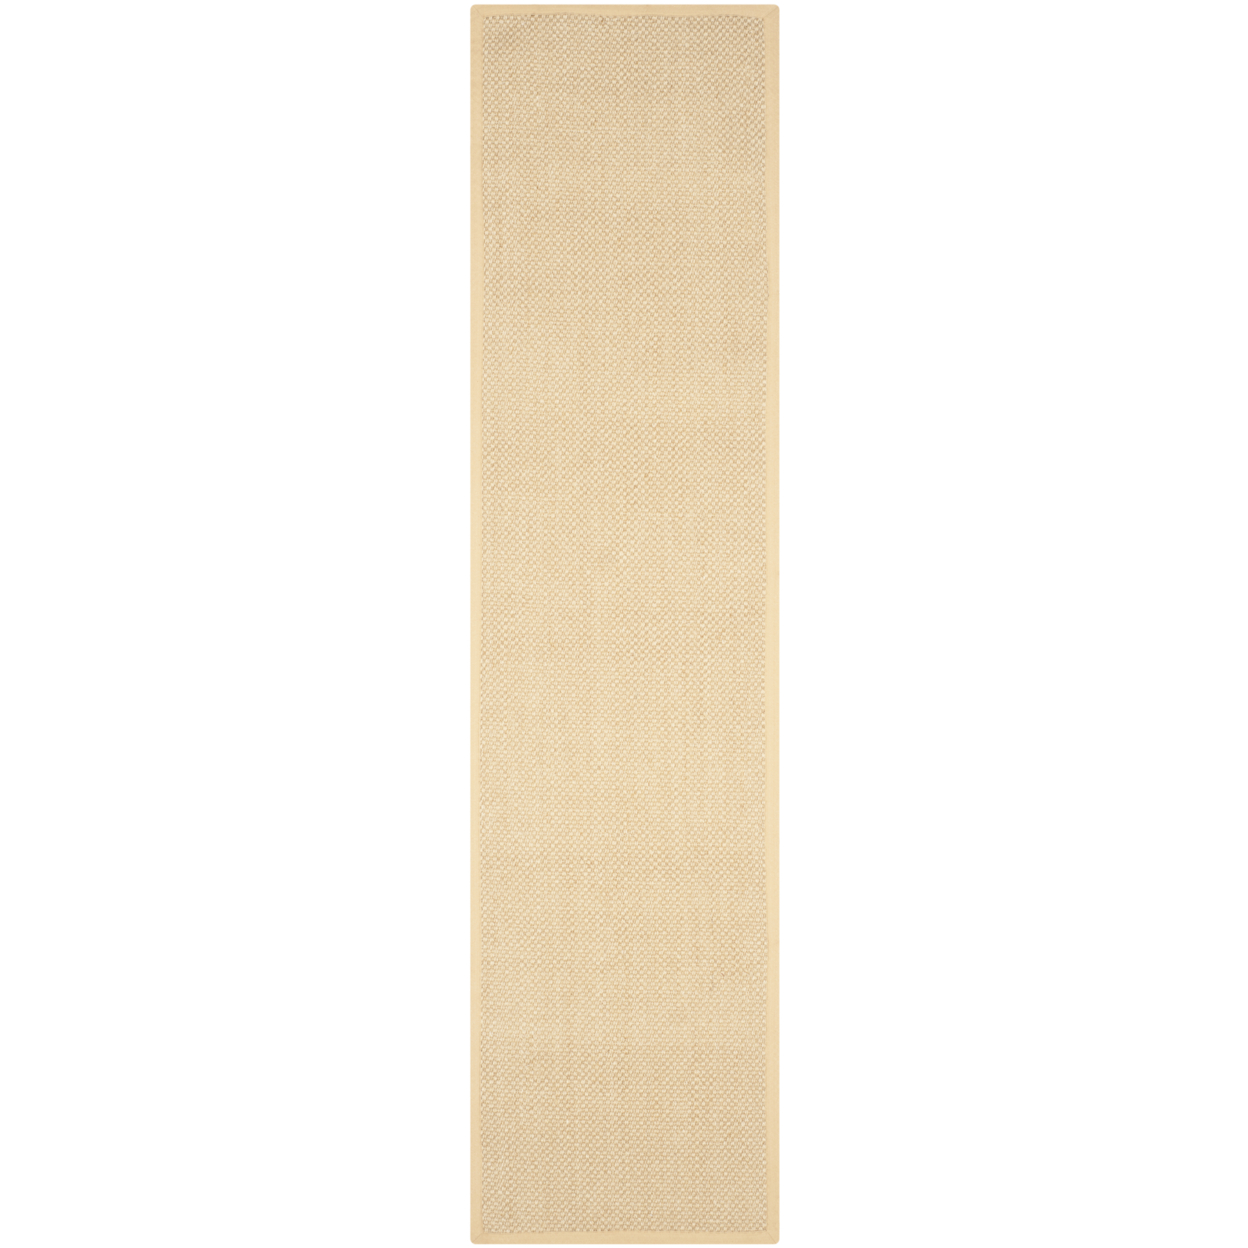 SAFAVIEH Natural Fiber Collection NF443A Maize/Wheat Rug - 8' X 10'